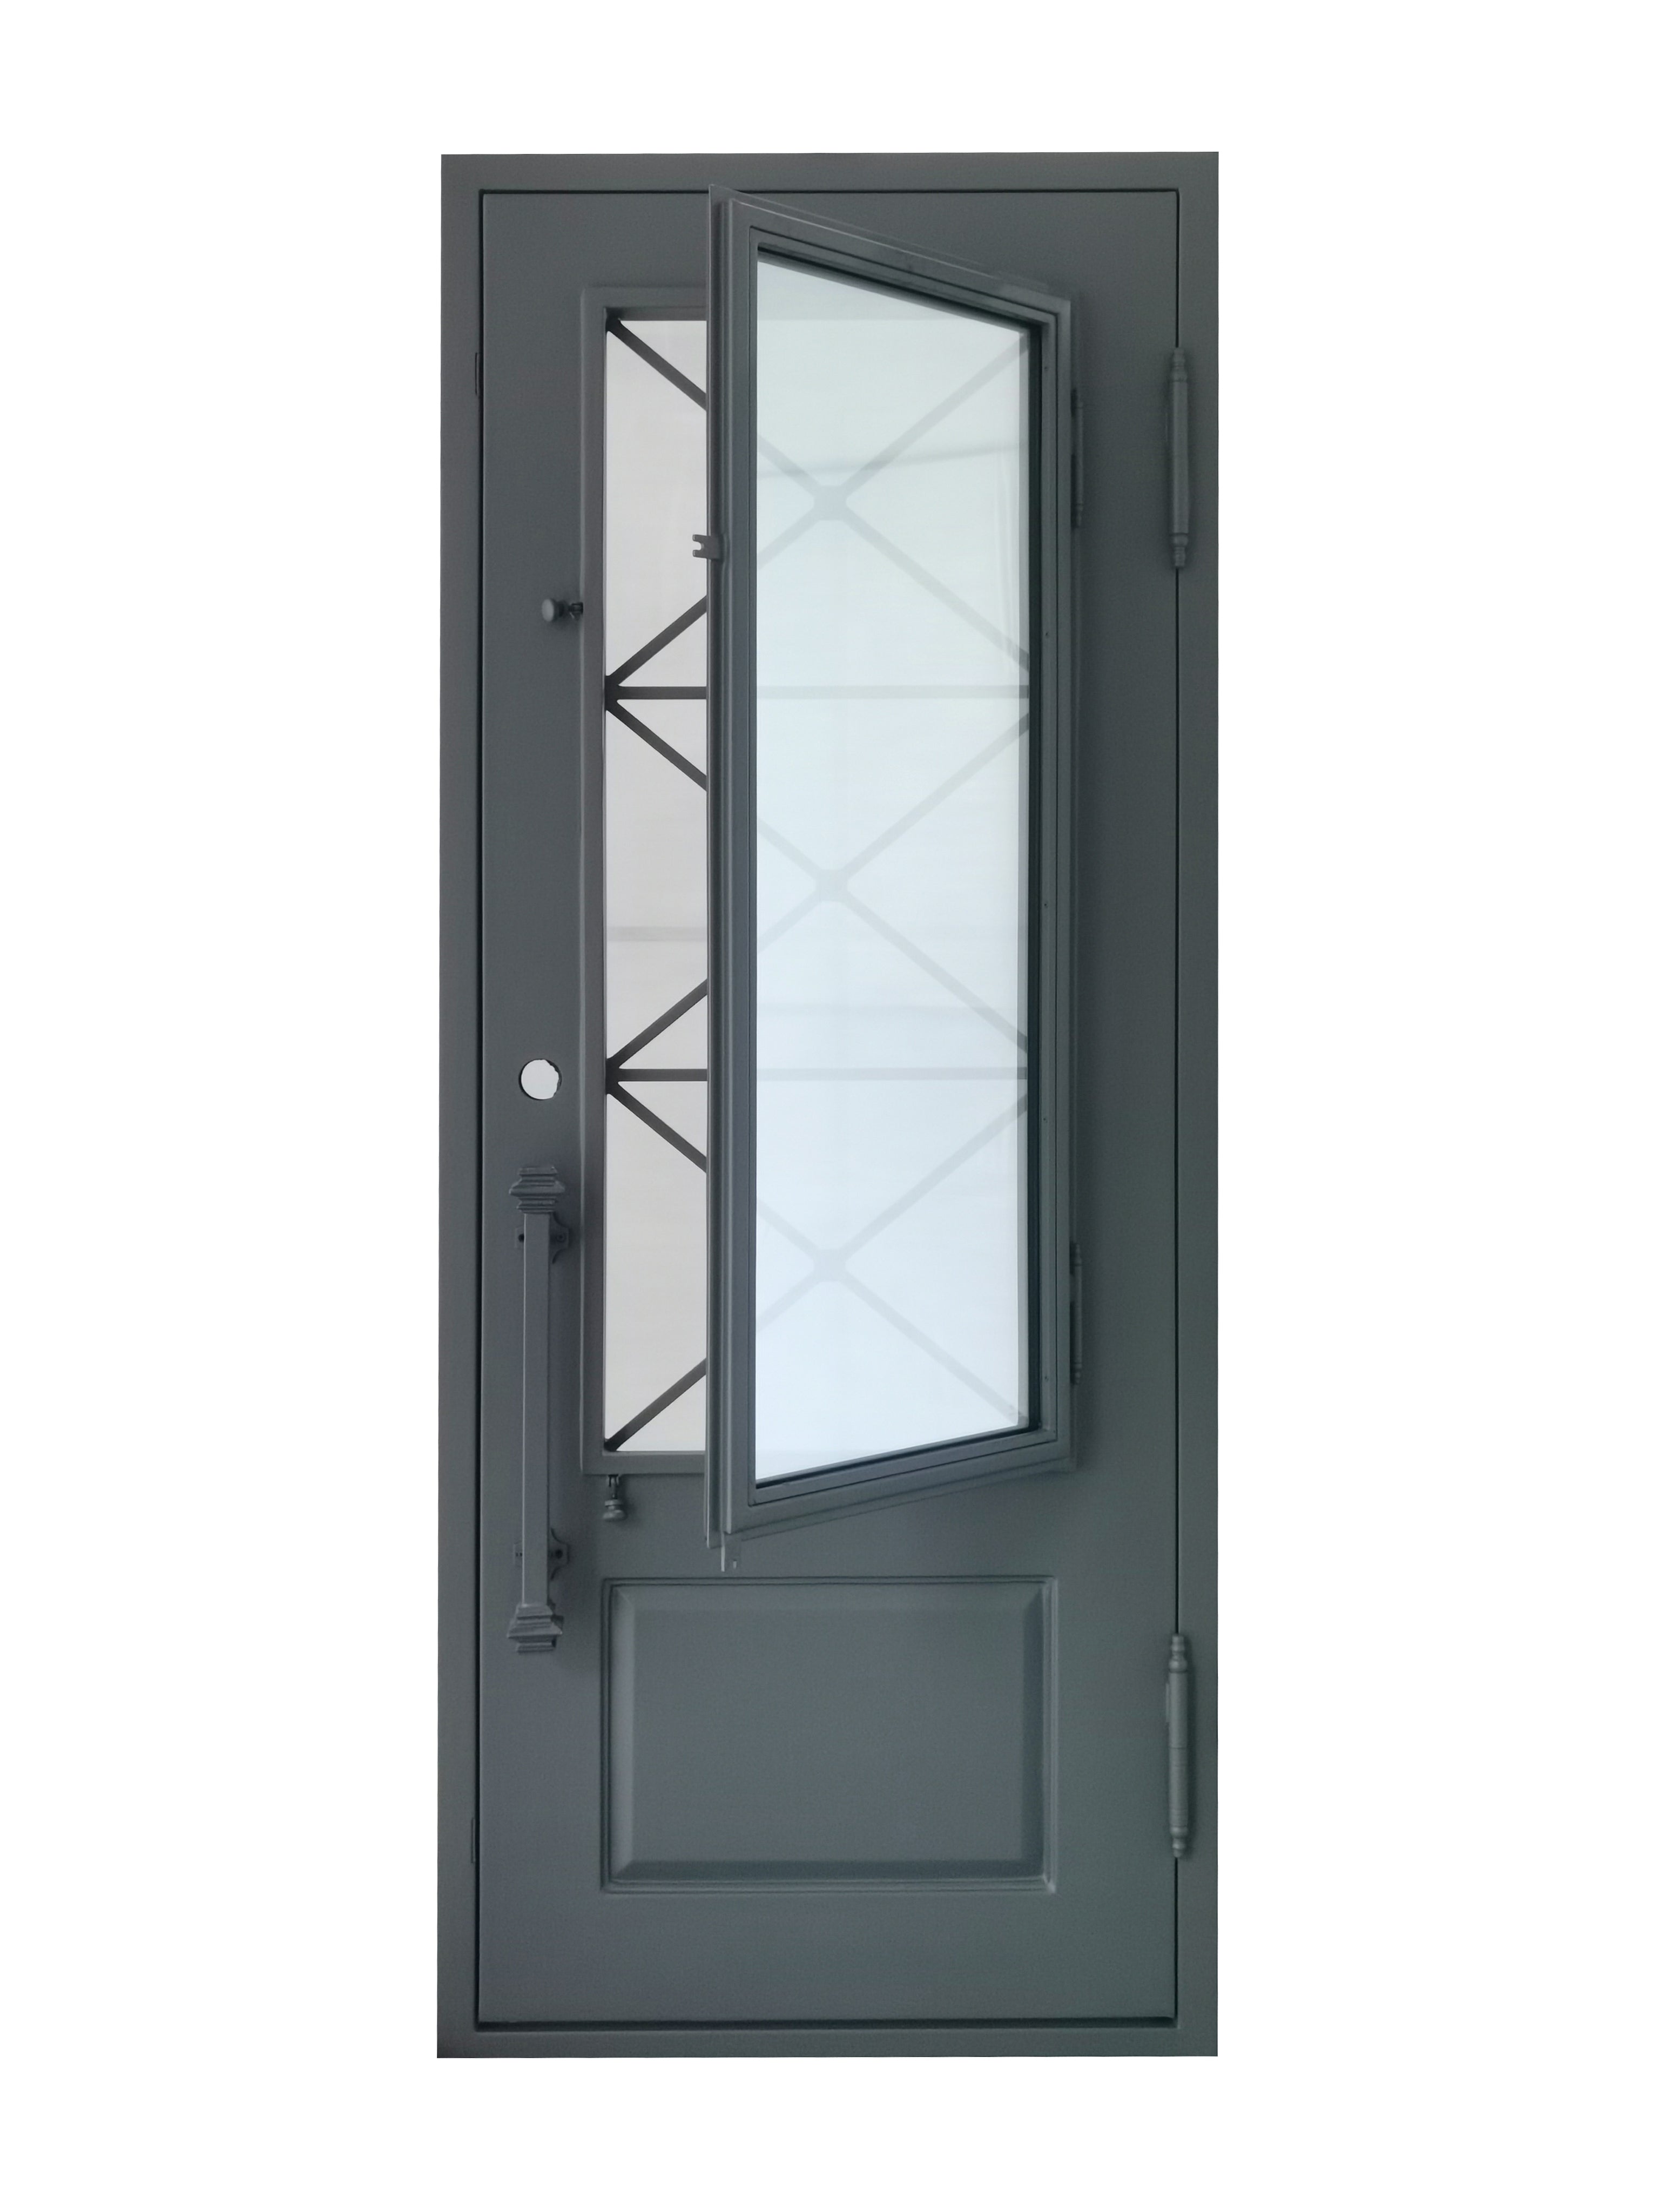 Rockport Model Pre Hung Single Front Entry Wrought Iron Door With Reflective Glass Dark Grey Finish